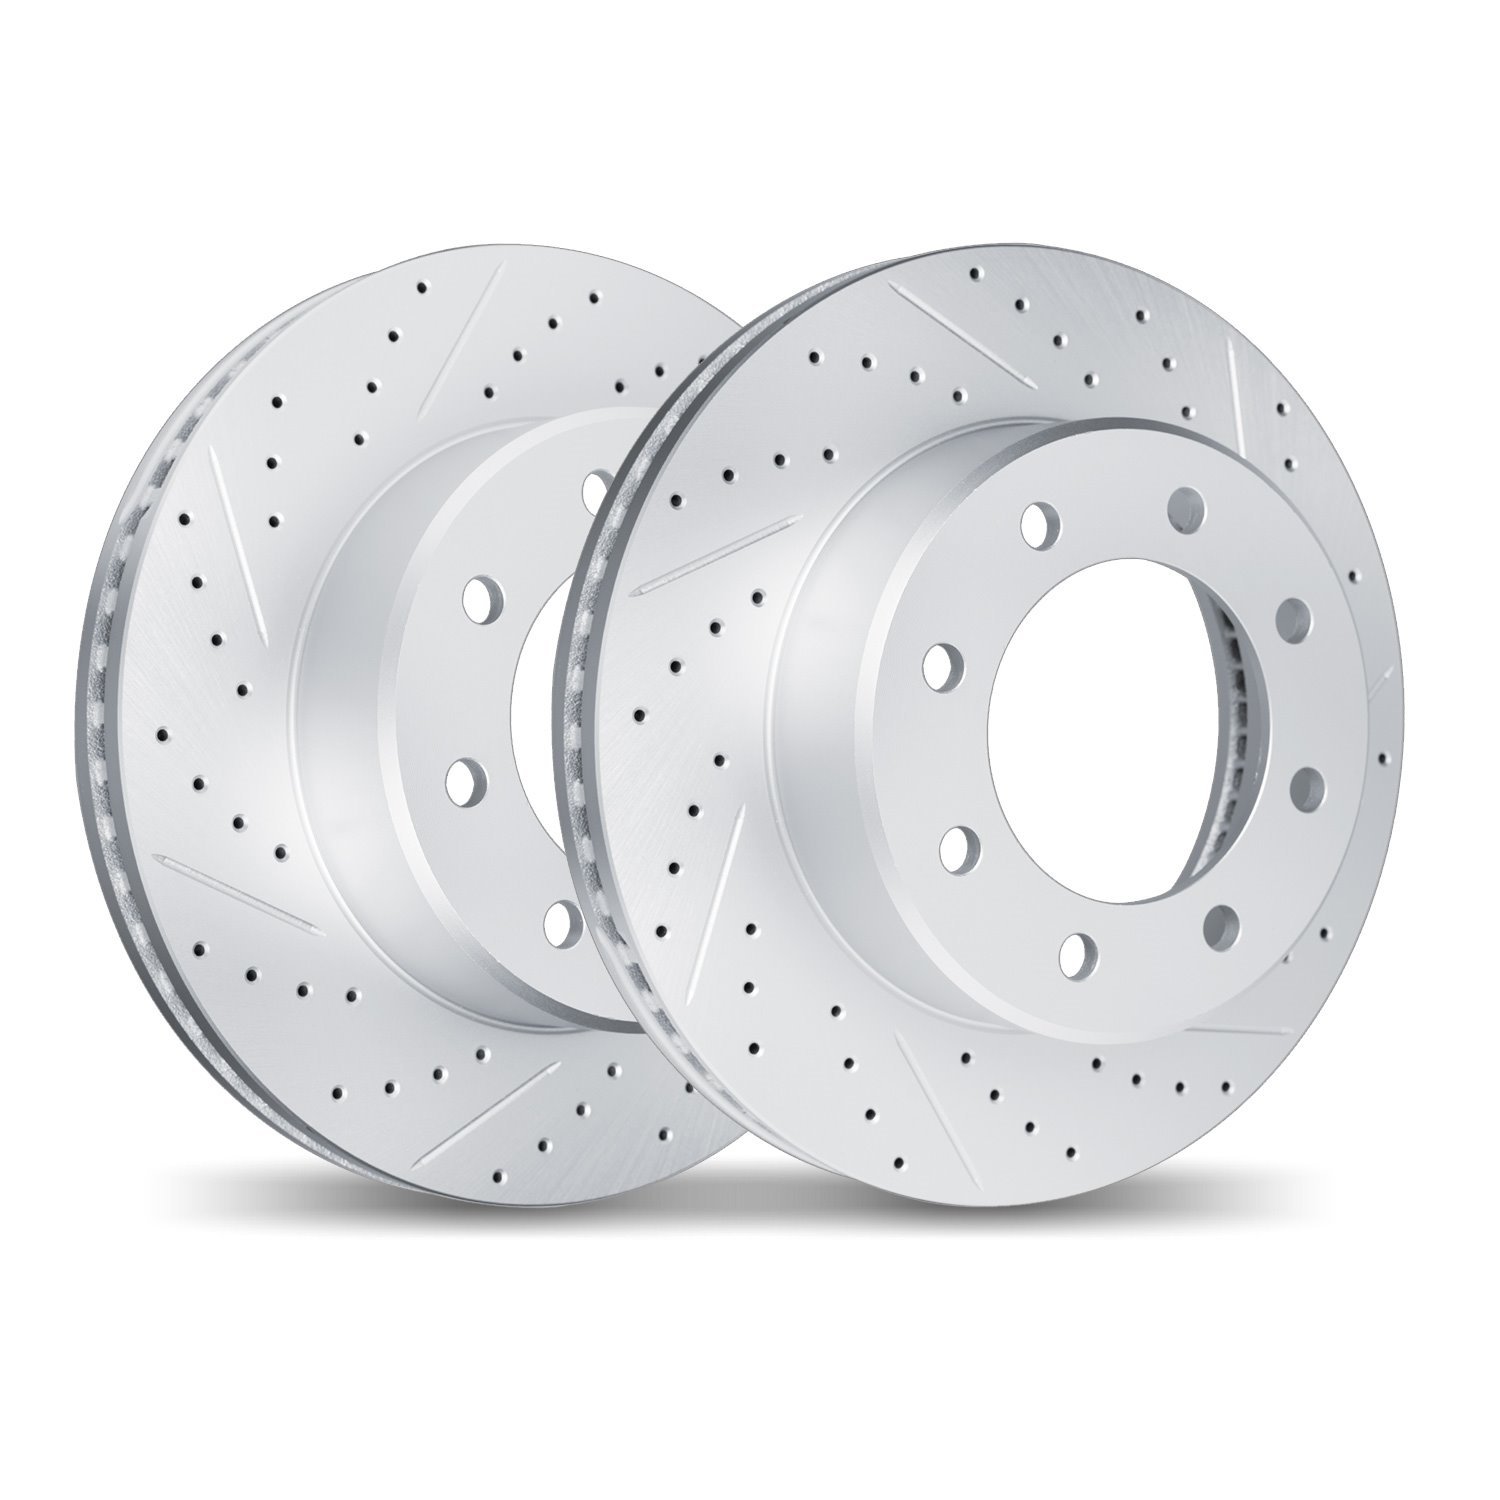 2002-54120 Geoperformance Drilled/Slotted Brake Rotors, 1999-2007 Ford/Lincoln/Mercury/Mazda, Position: Rear